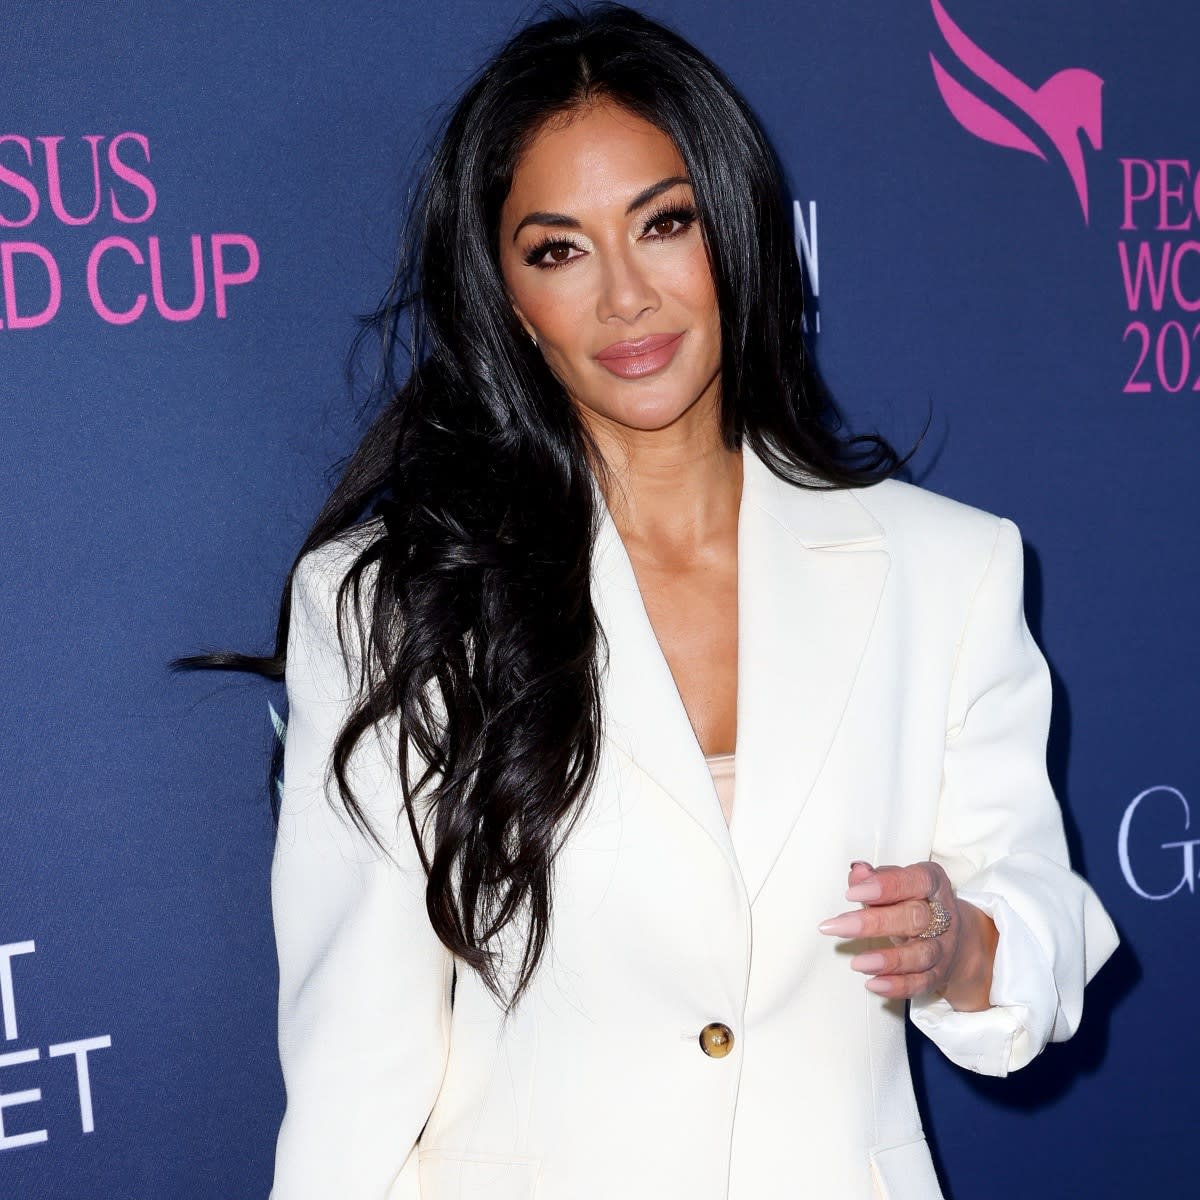 Nicole Scherzinger Is 'Super Proud' of Her Role in Putting One Direction Together on 'X Factor' 